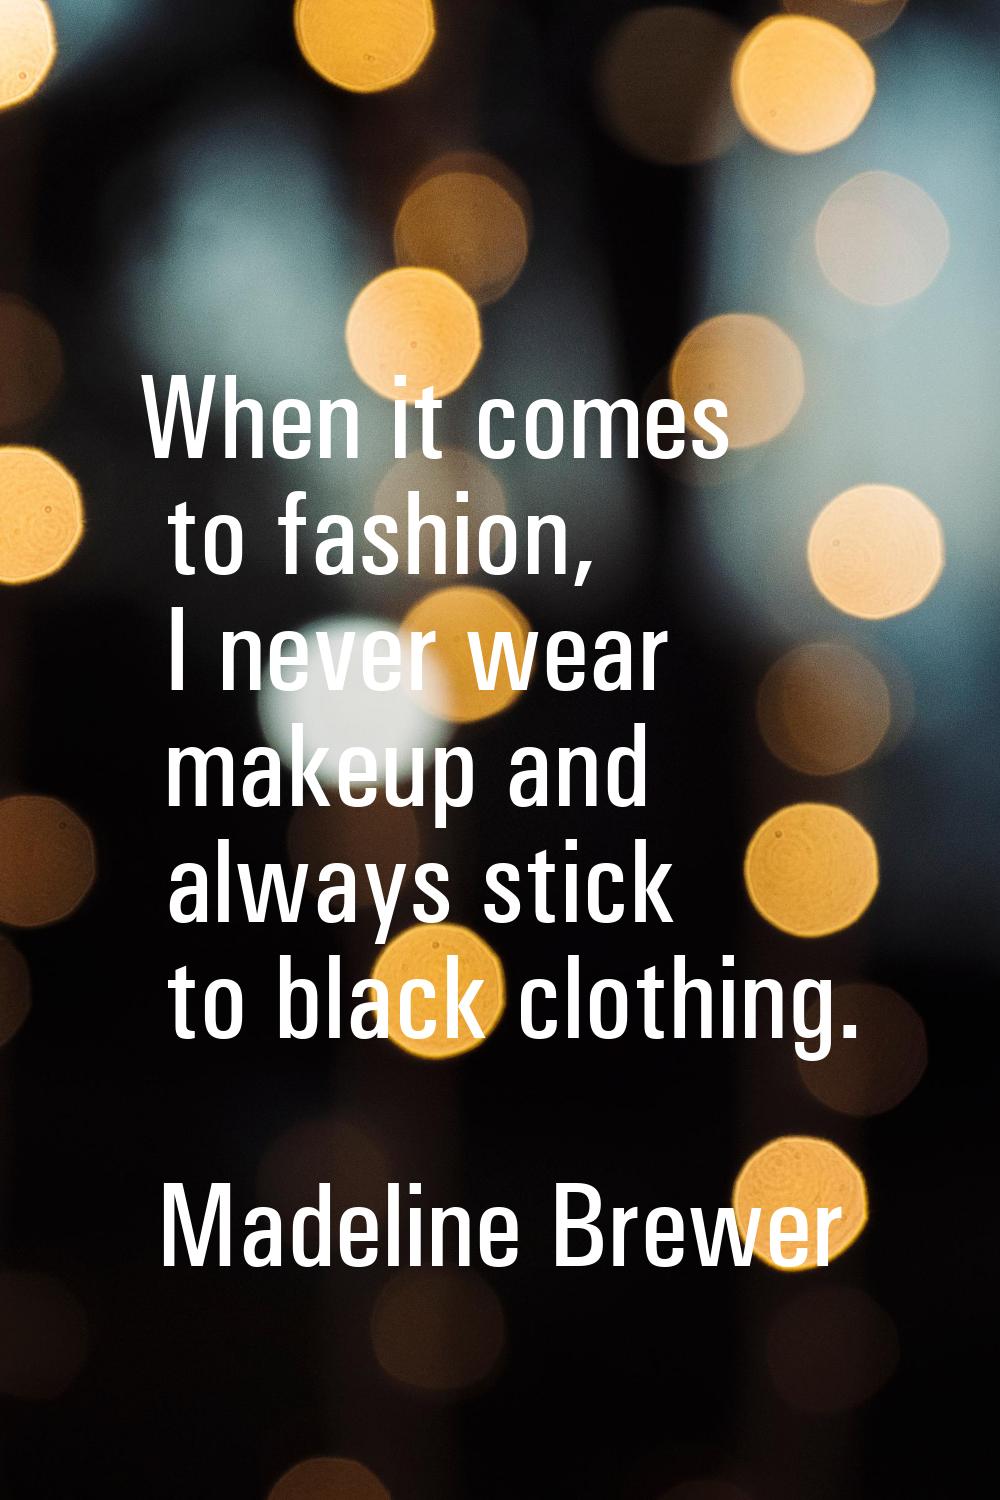 When it comes to fashion, I never wear makeup and always stick to black clothing.